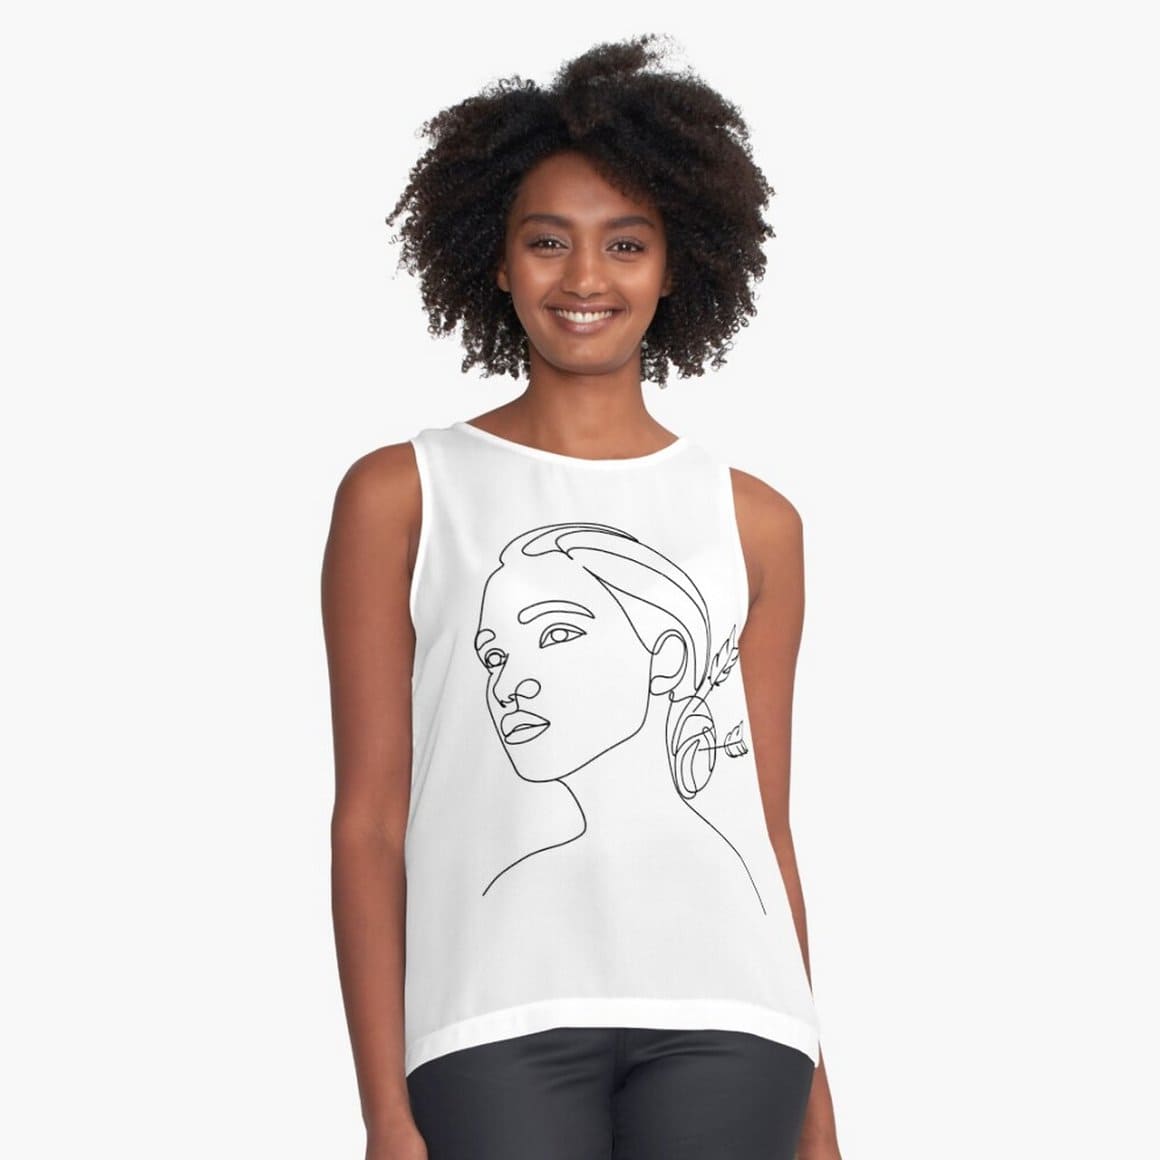 White T-shirt on a colored young lady with a zodiac horoscope.